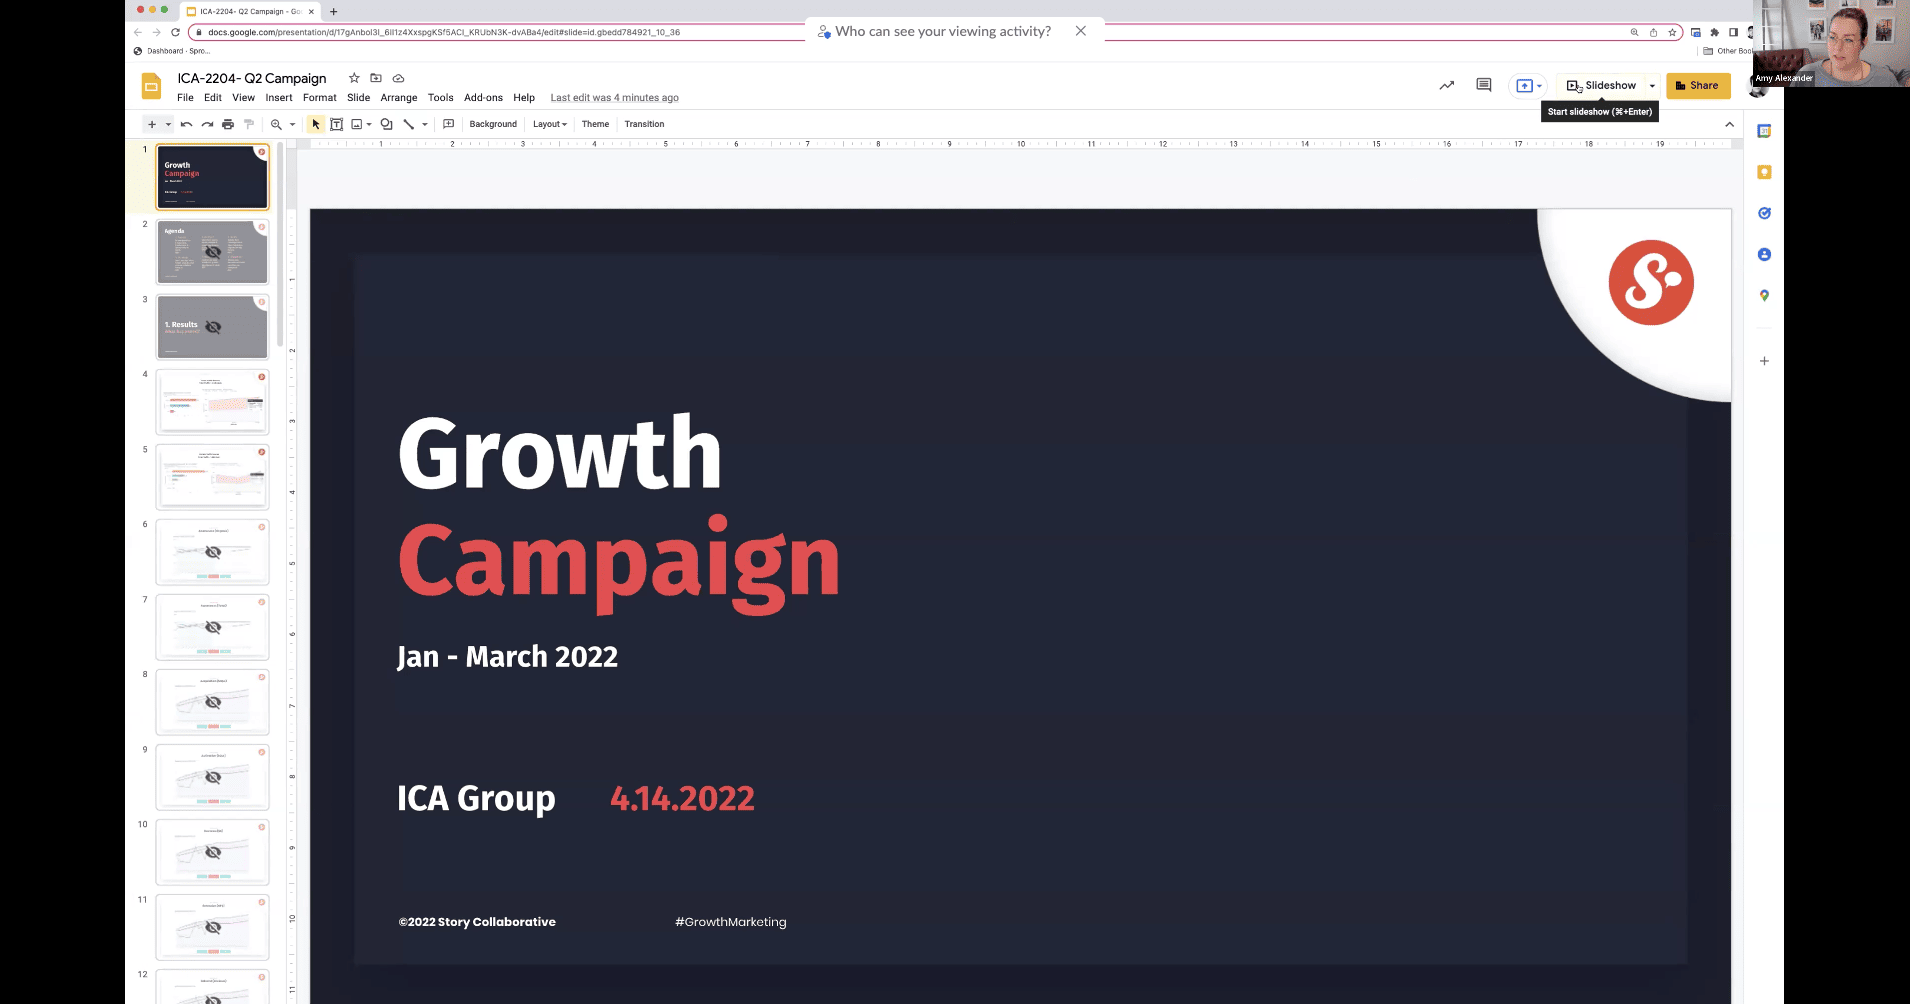 Growth Campaign Q1